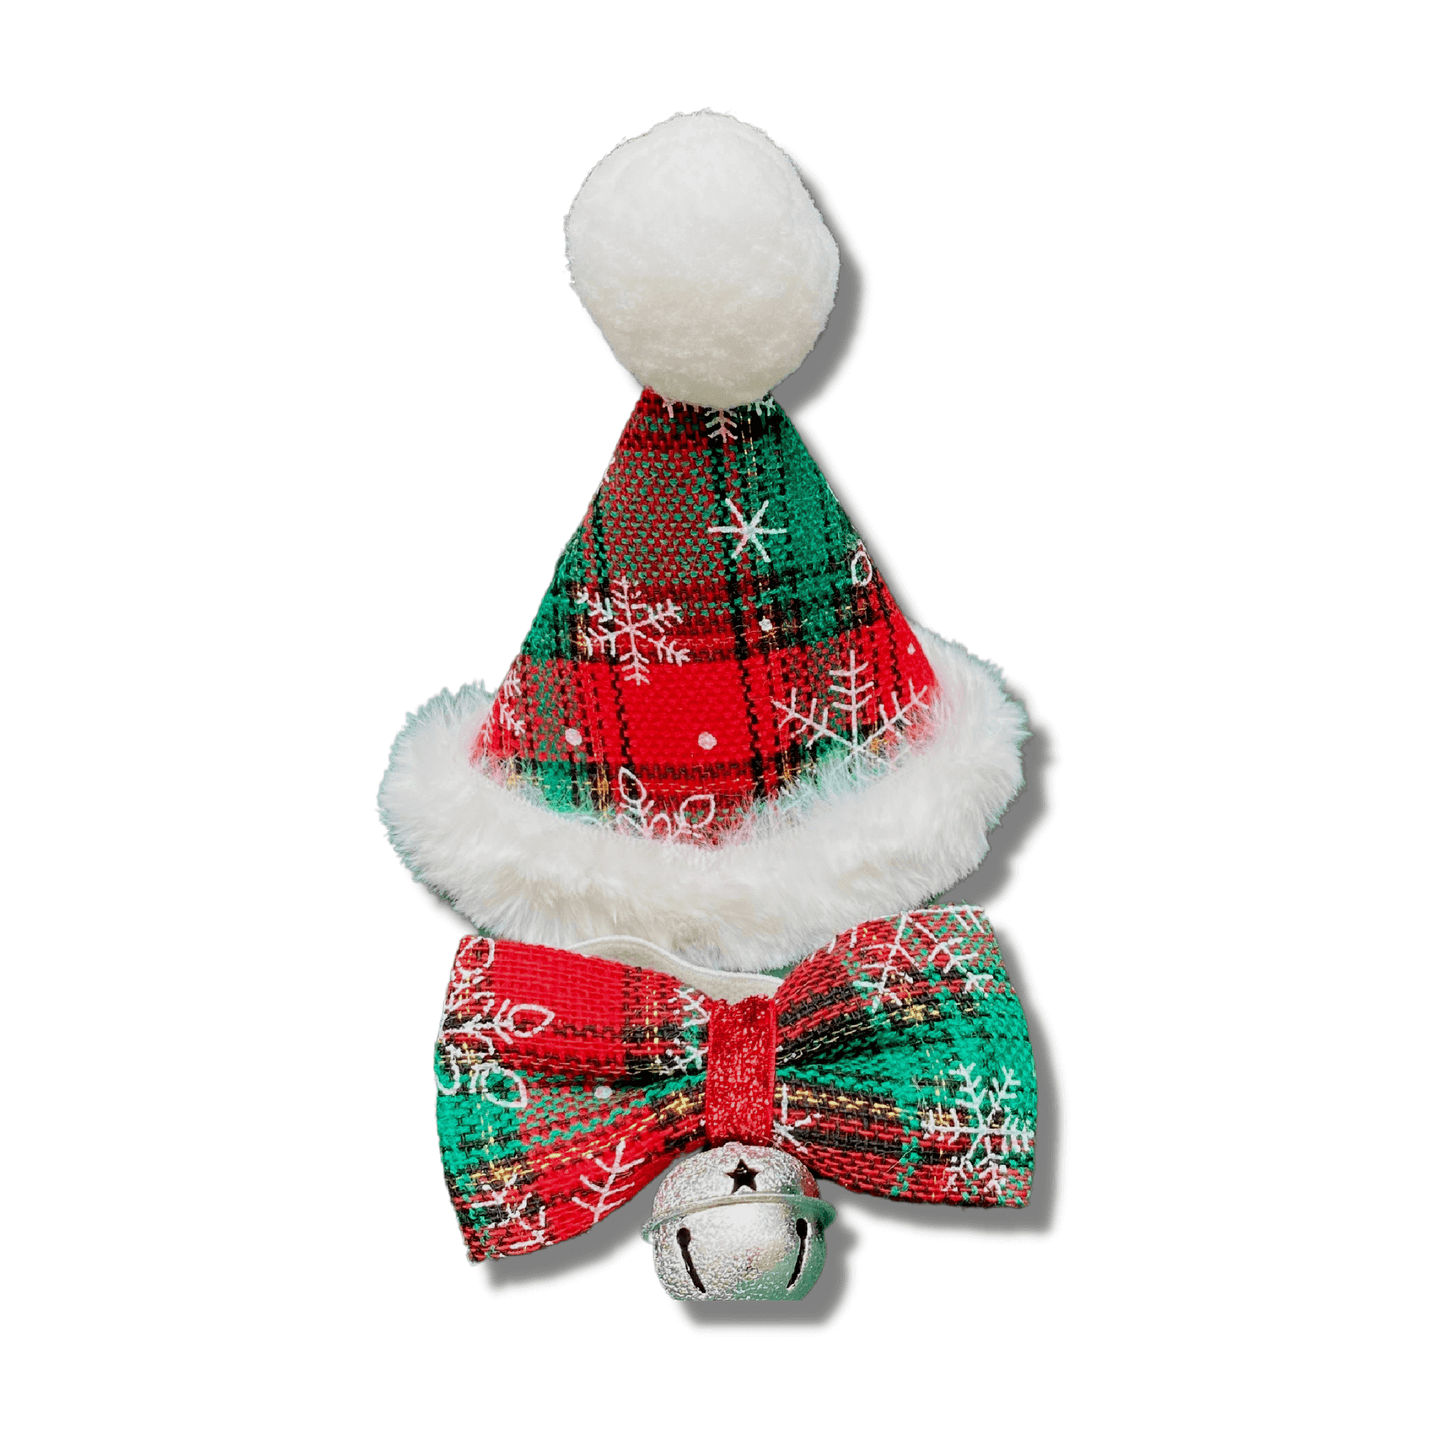 Christmas hat and bowtie set for dogs, dog clothing, let's pawty 